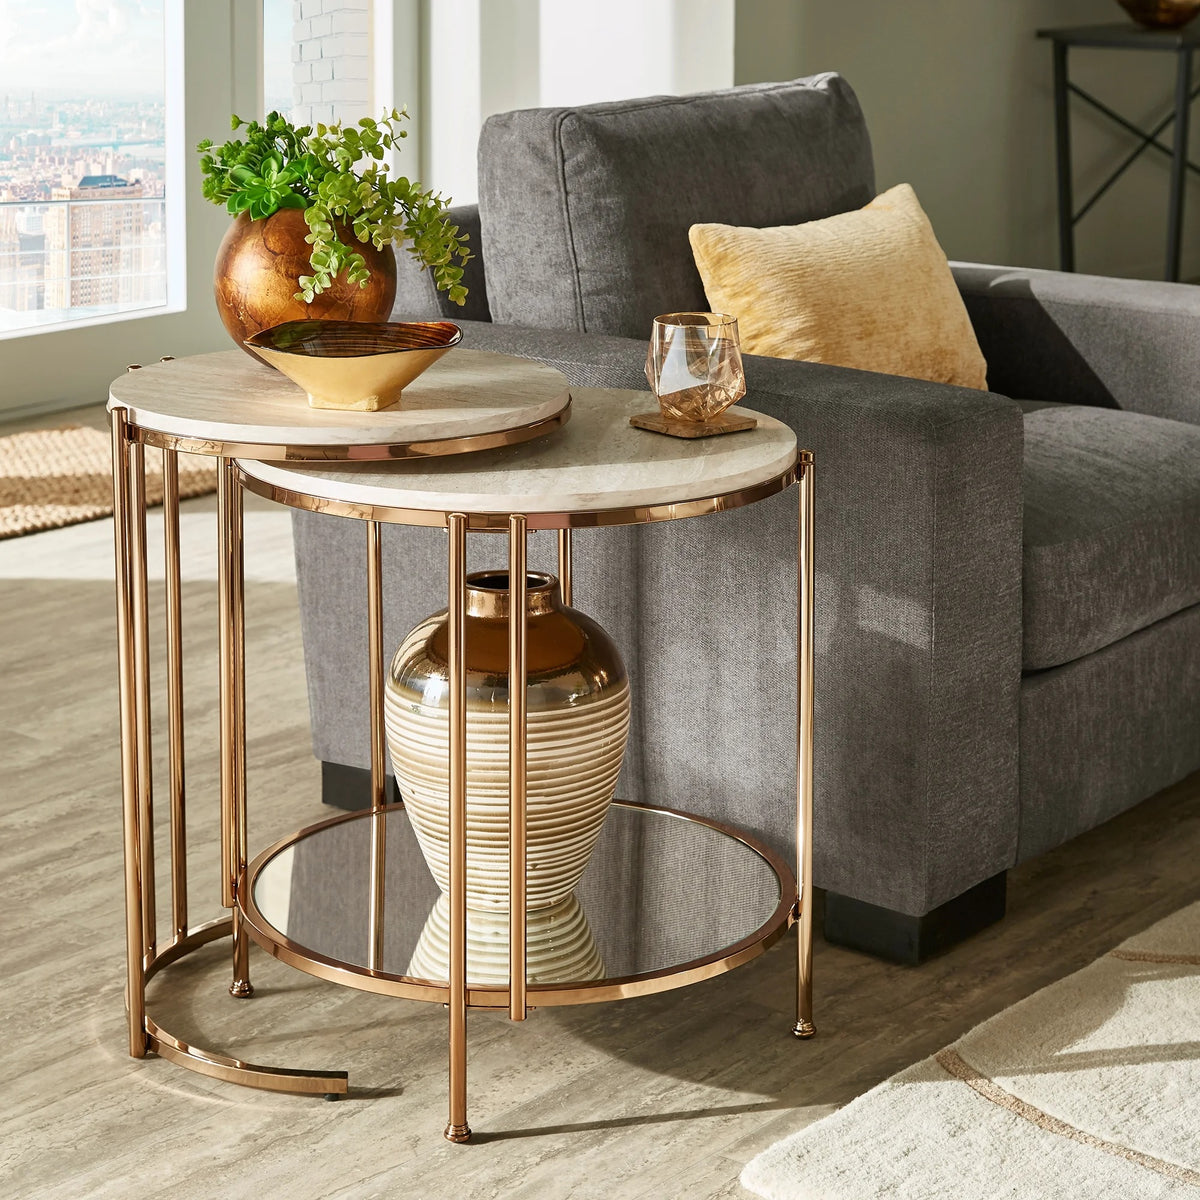 ST-22 Side Table